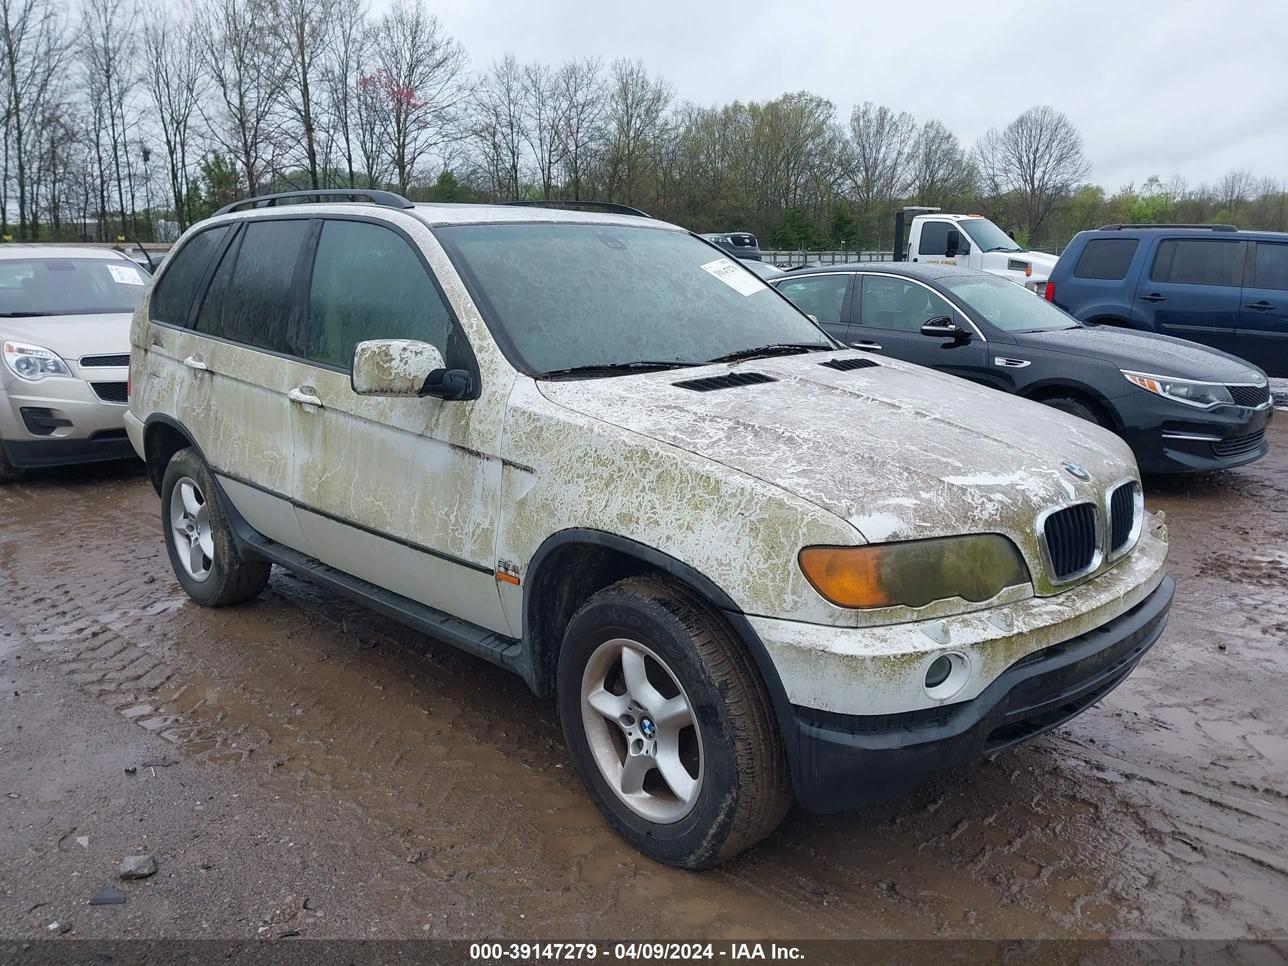 vin: 5UXFA535X3LV97235 5UXFA535X3LV97235 2003 bmw x5 3000 for Sale in 37914, 3634 E. Governor John Sevier Hwy, Knoxville, Tennessee, USA